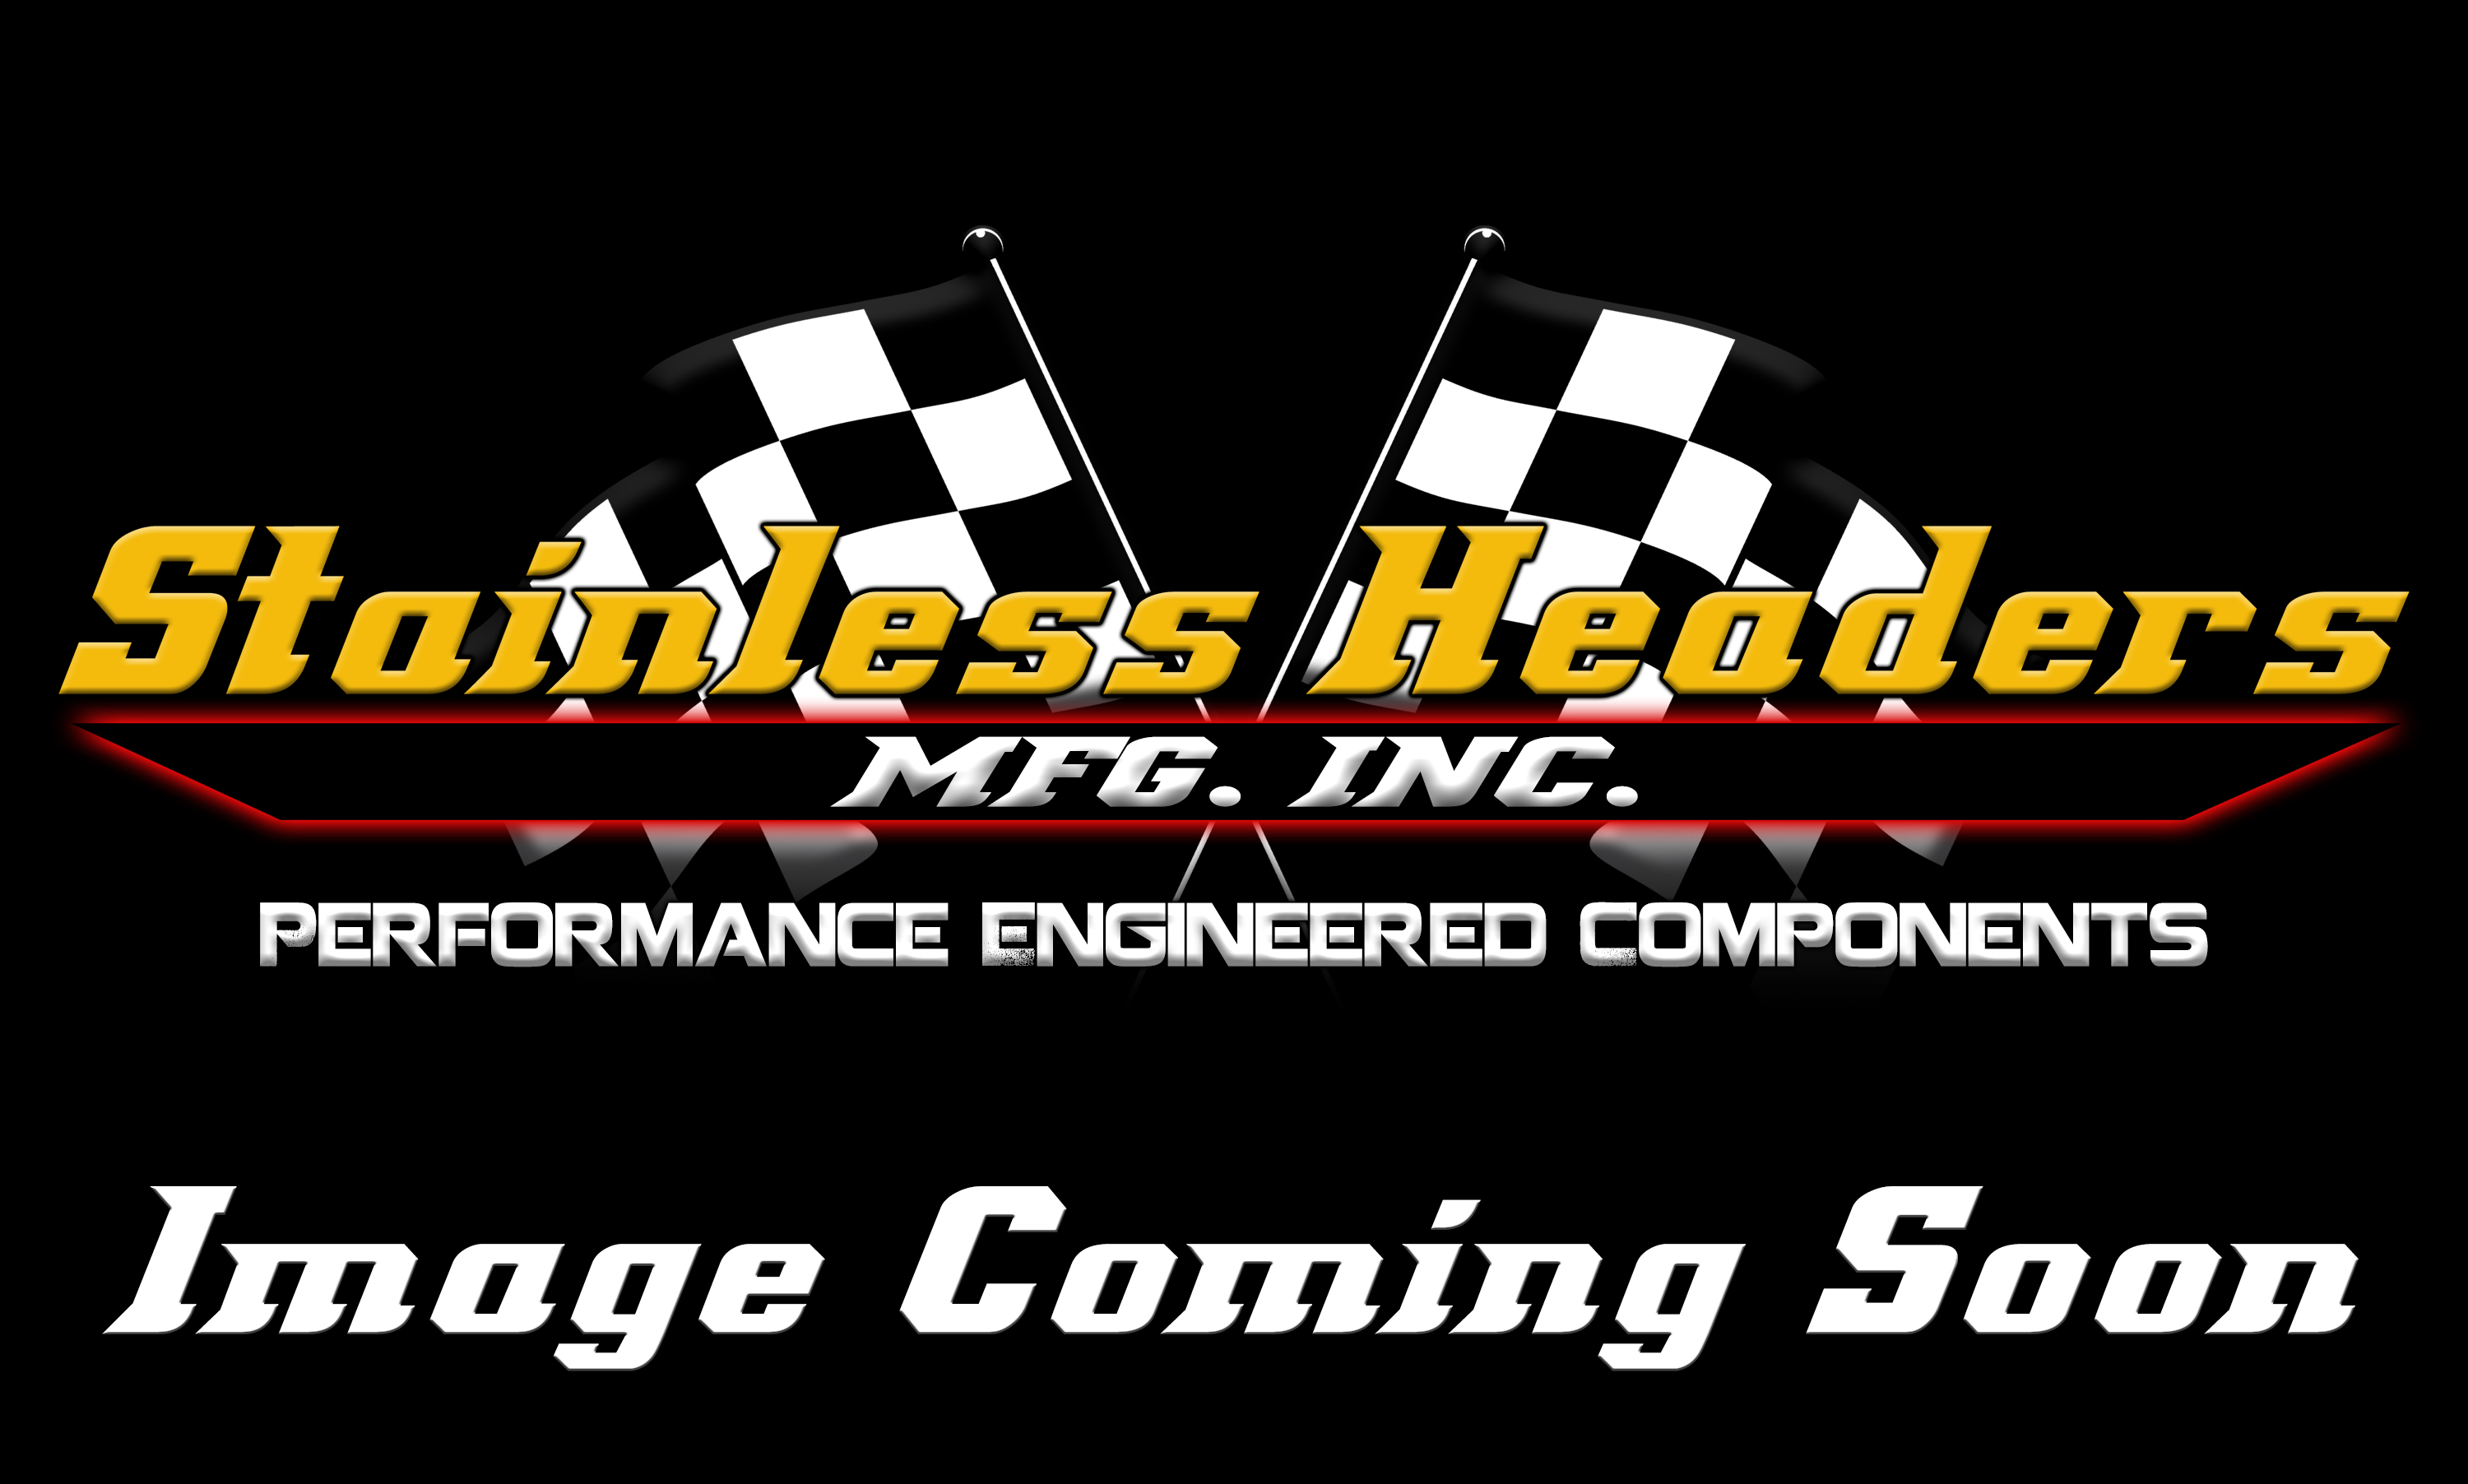 Stainless Headers - 1 5/8" Primary 8 into 1 Performance Merge Collector-16ga 304ss